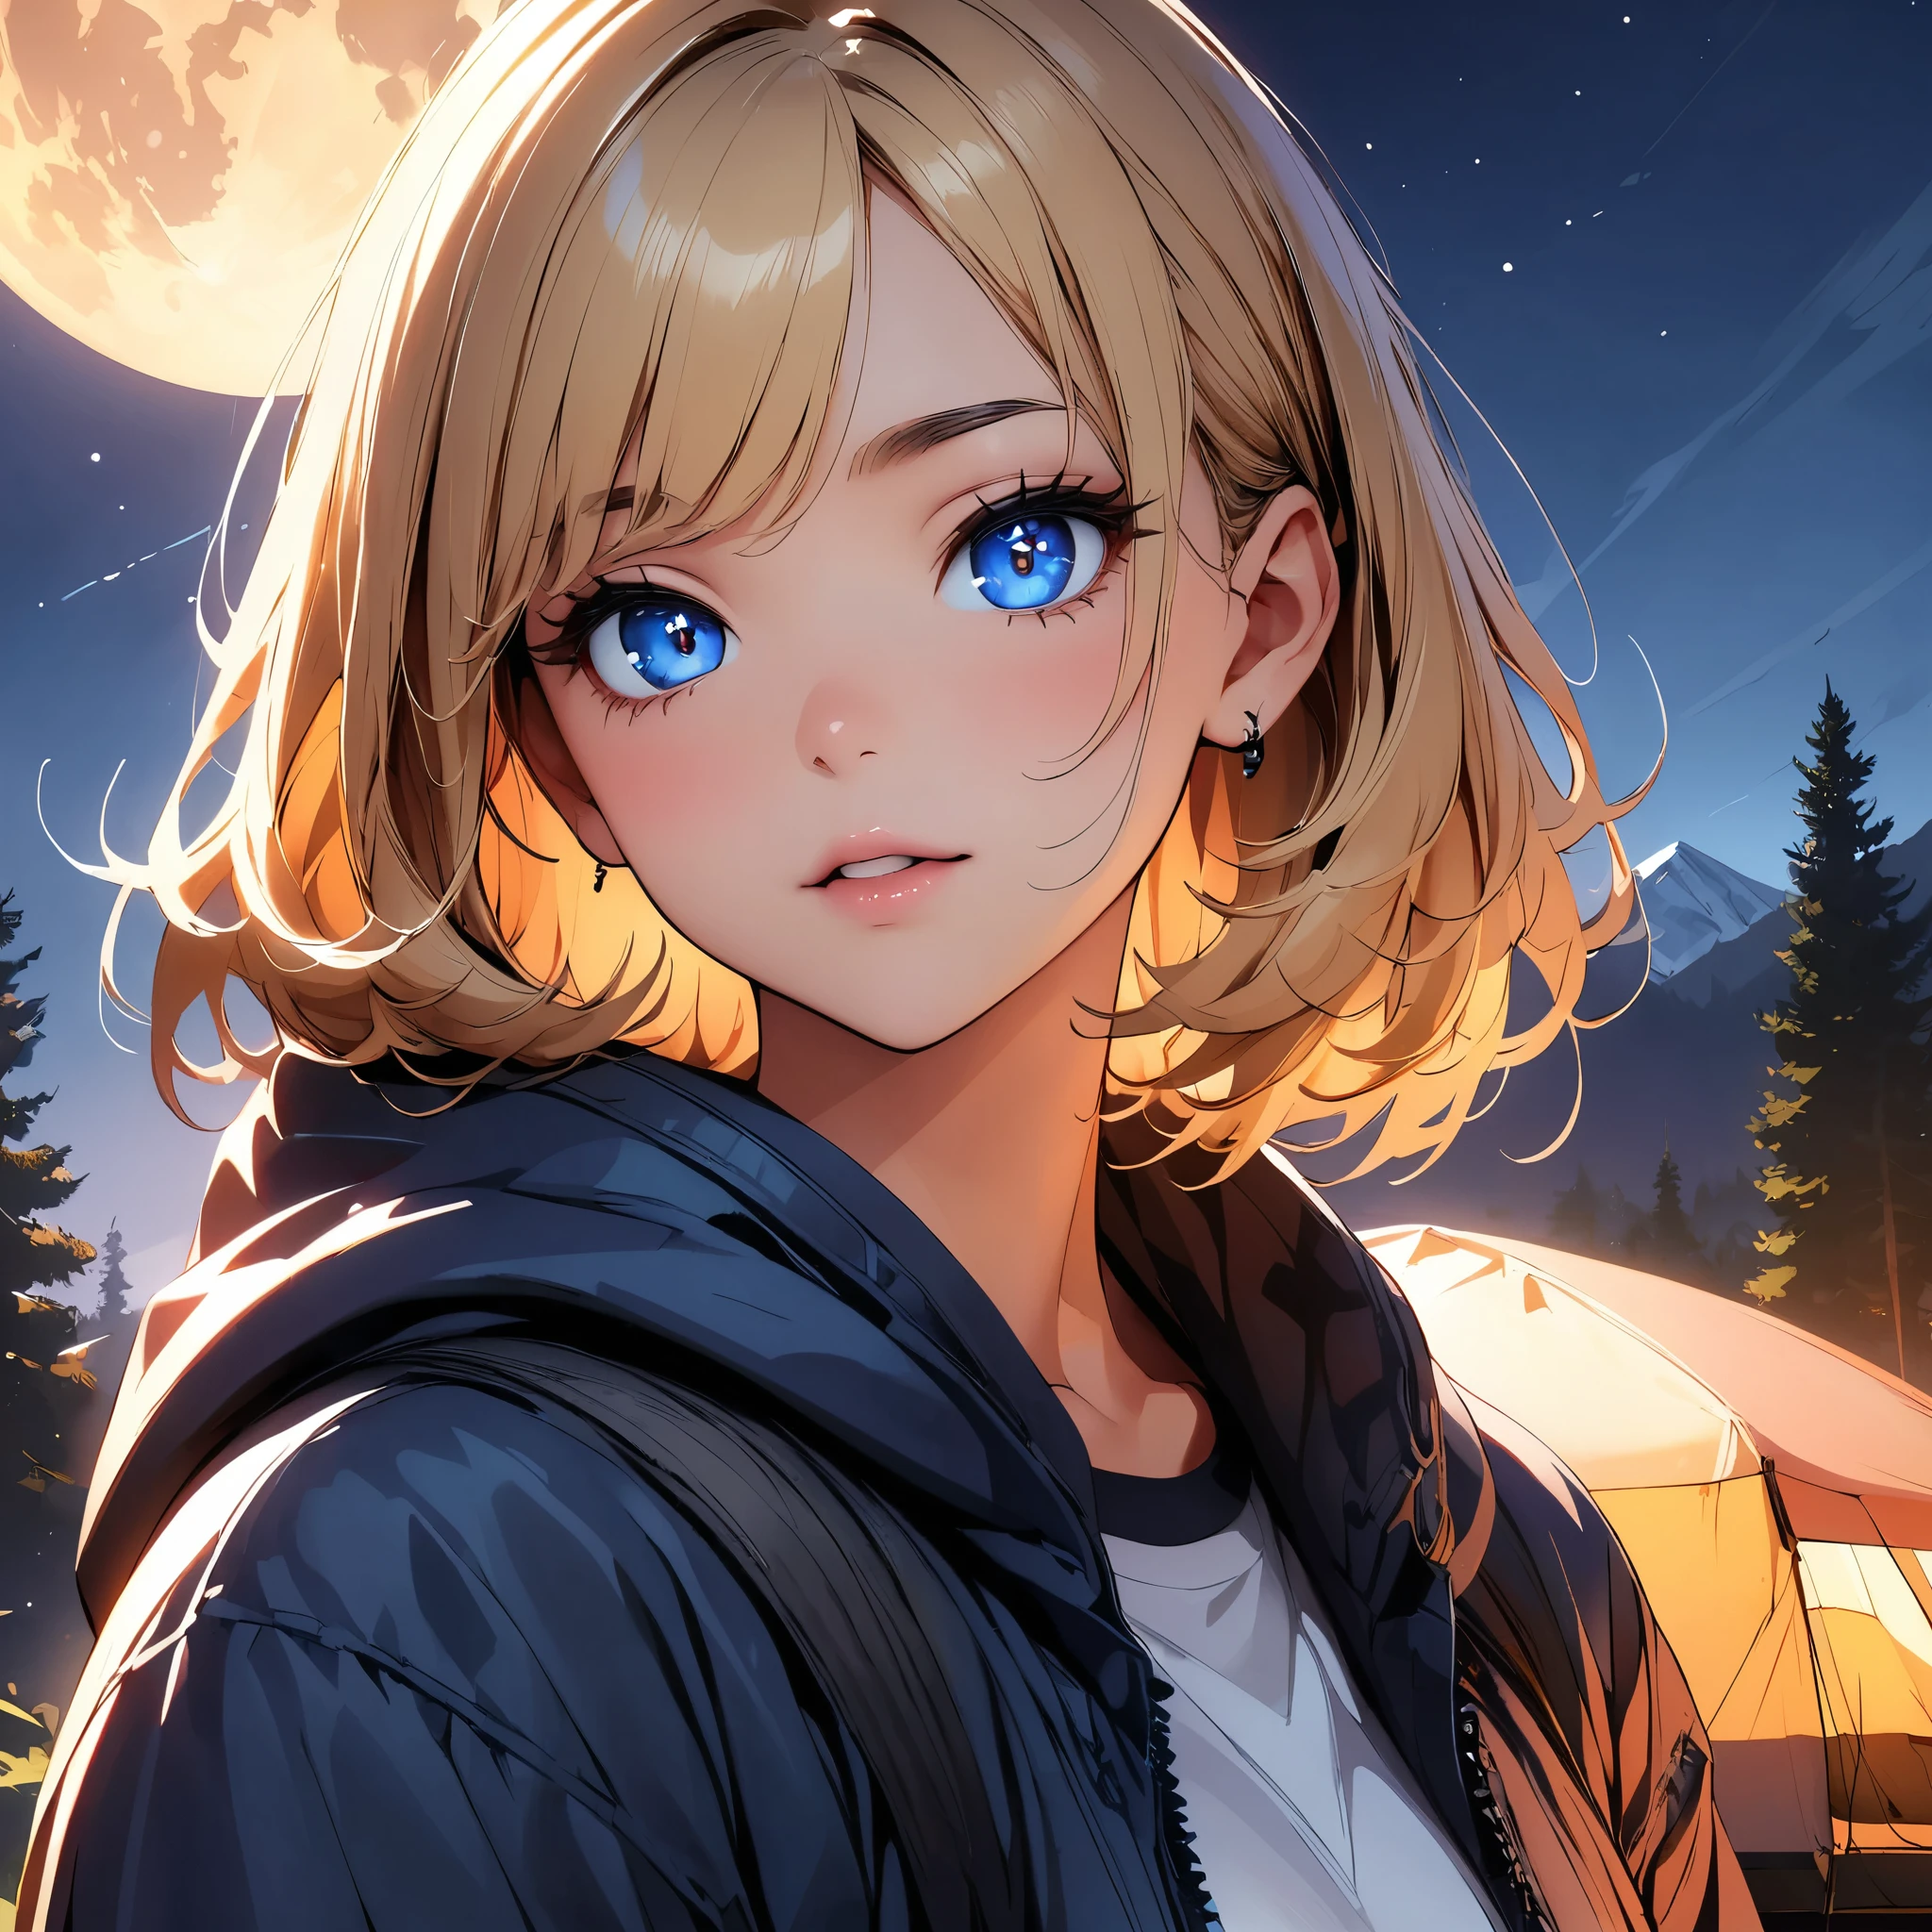 (highest quality:1.2, Very detailed, High Detail, High Contrast, masterpiece:1.2, highest quality, Best aesthetics), 1 Female, Detailed outdoor camping scene, Beautiful detailed eyes, Beautiful detailed lips, Very detailedな顔, Long eyelashes, Camping gear, Camping Tents, Night Sky, full moon, Star Moon, Star Moon, Mountain in the background々, pine tree, Stream with rocks.